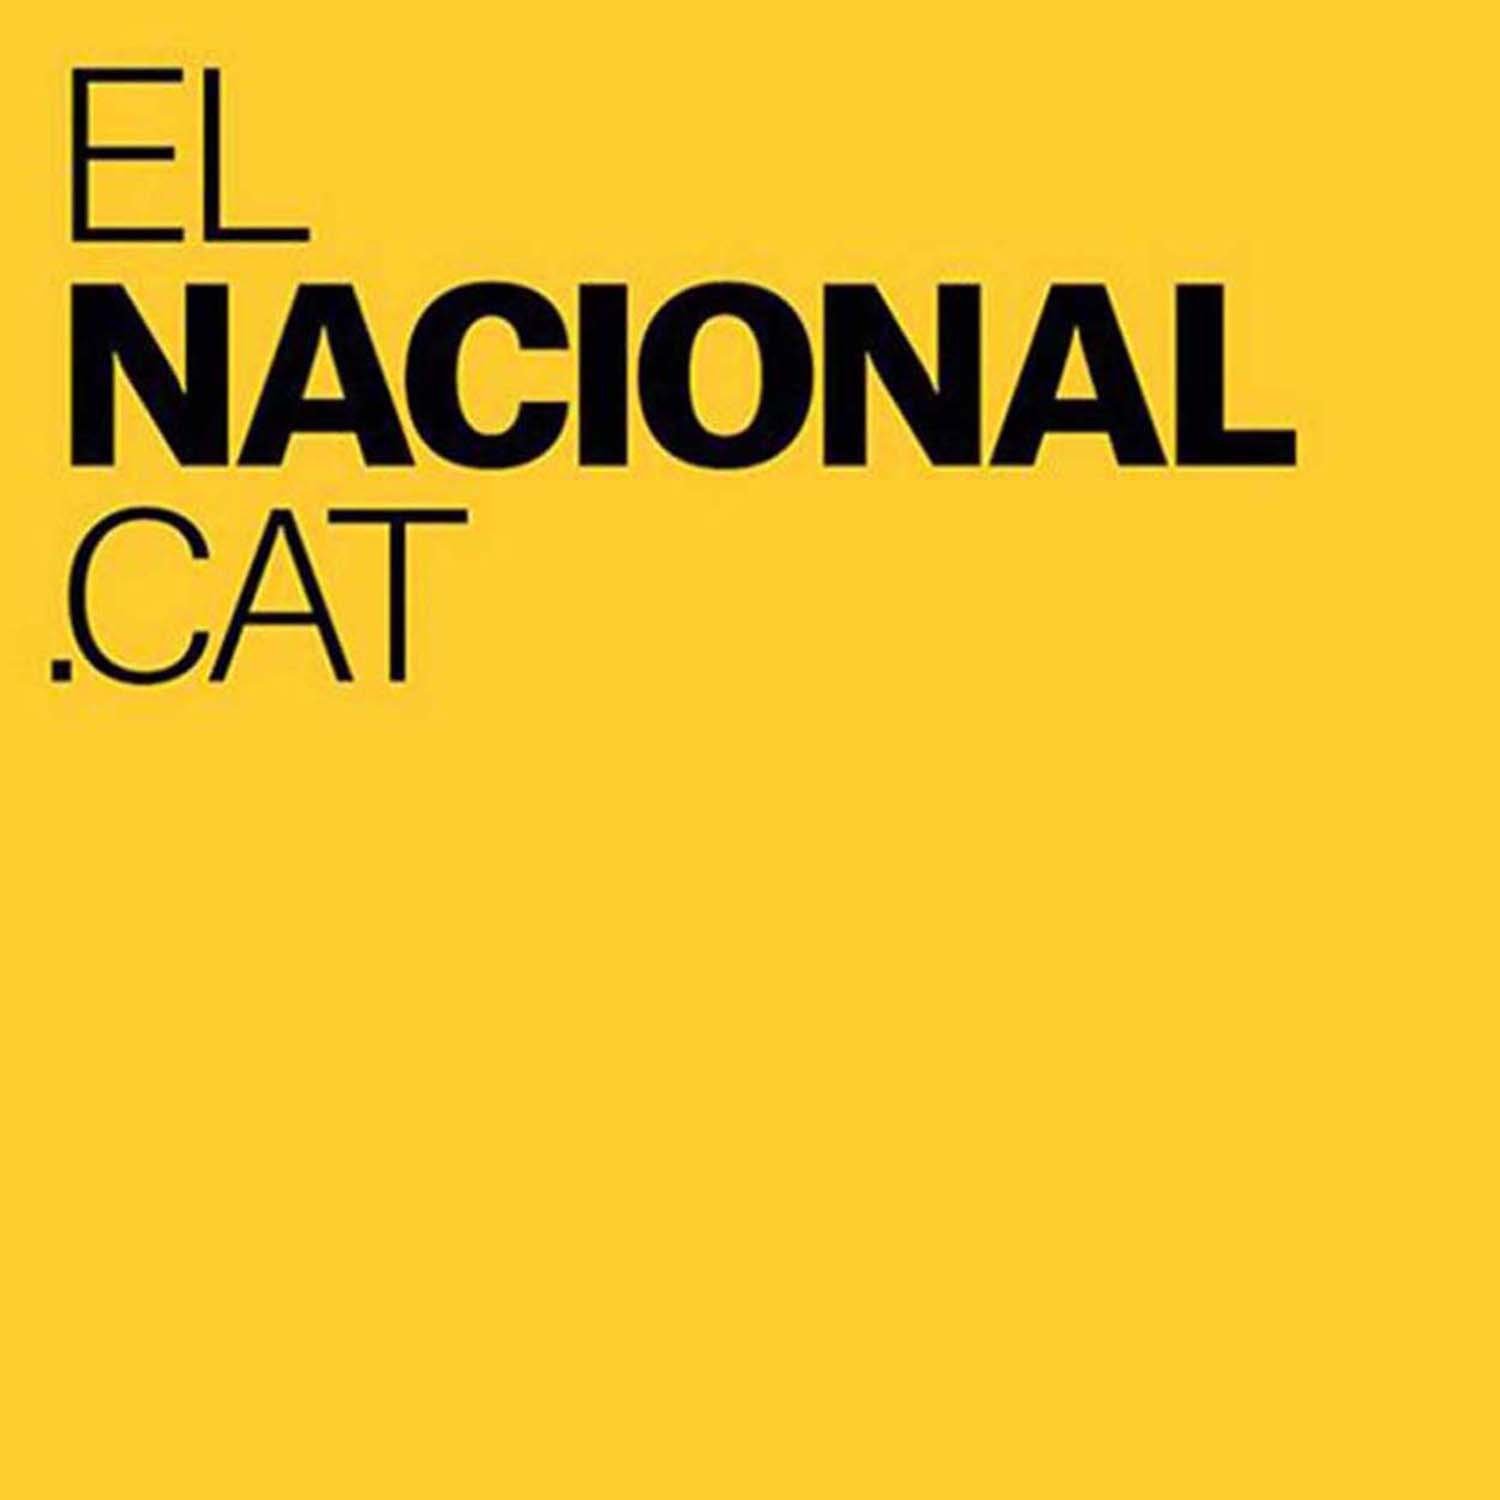 ElNacional.cat joins the "countrywide standstill"